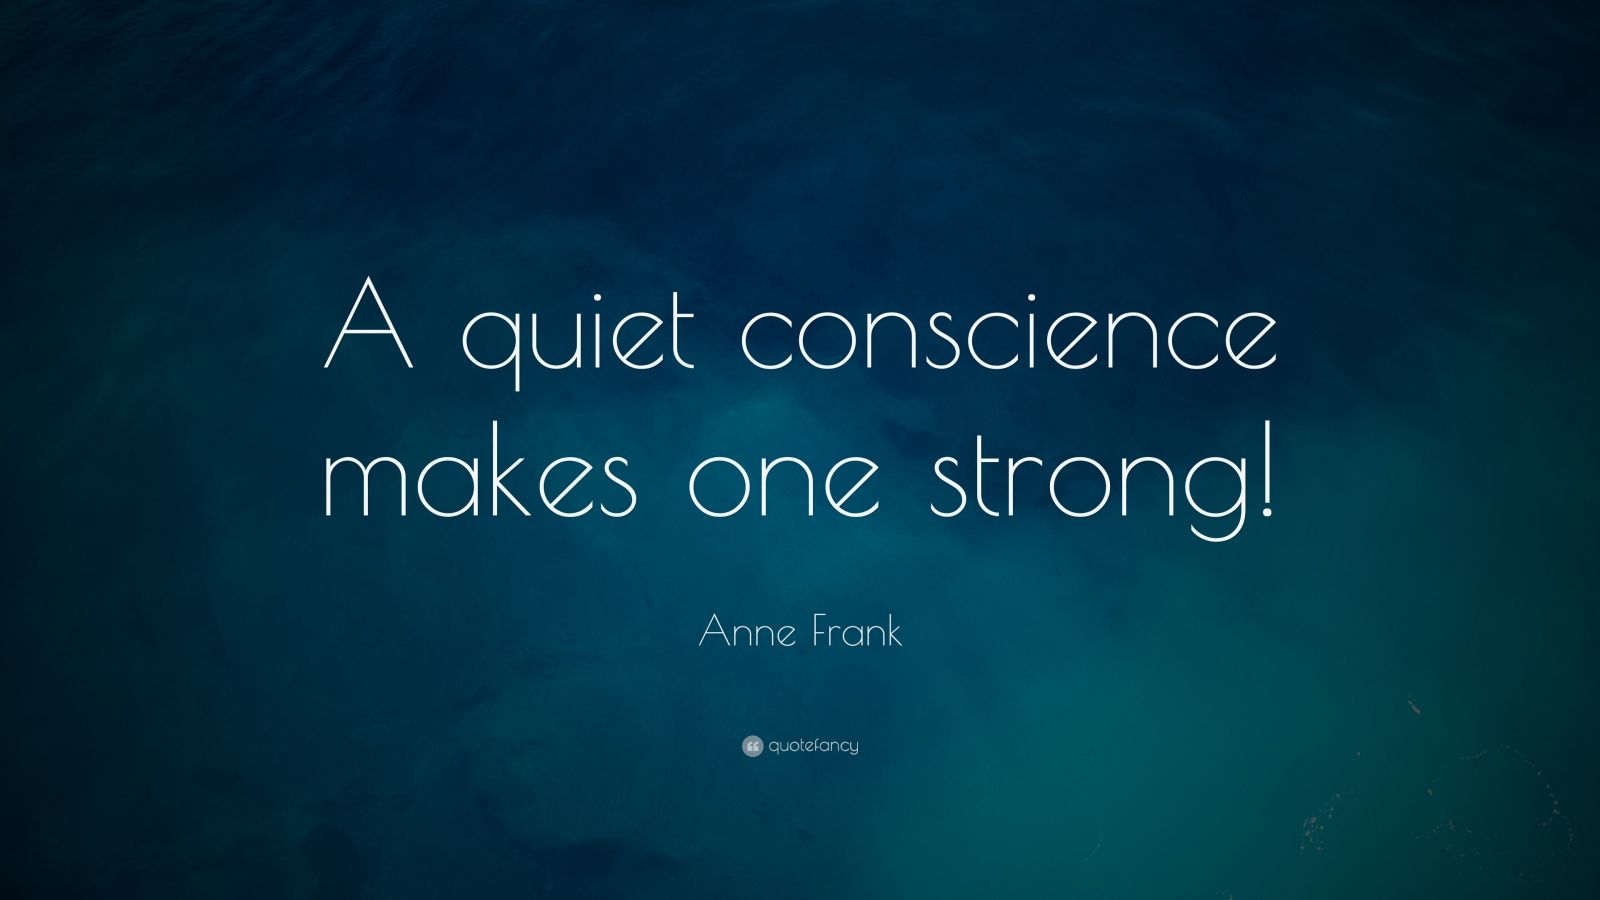 Anne Frank Quotes (100 wallpapers) - Quotefancy